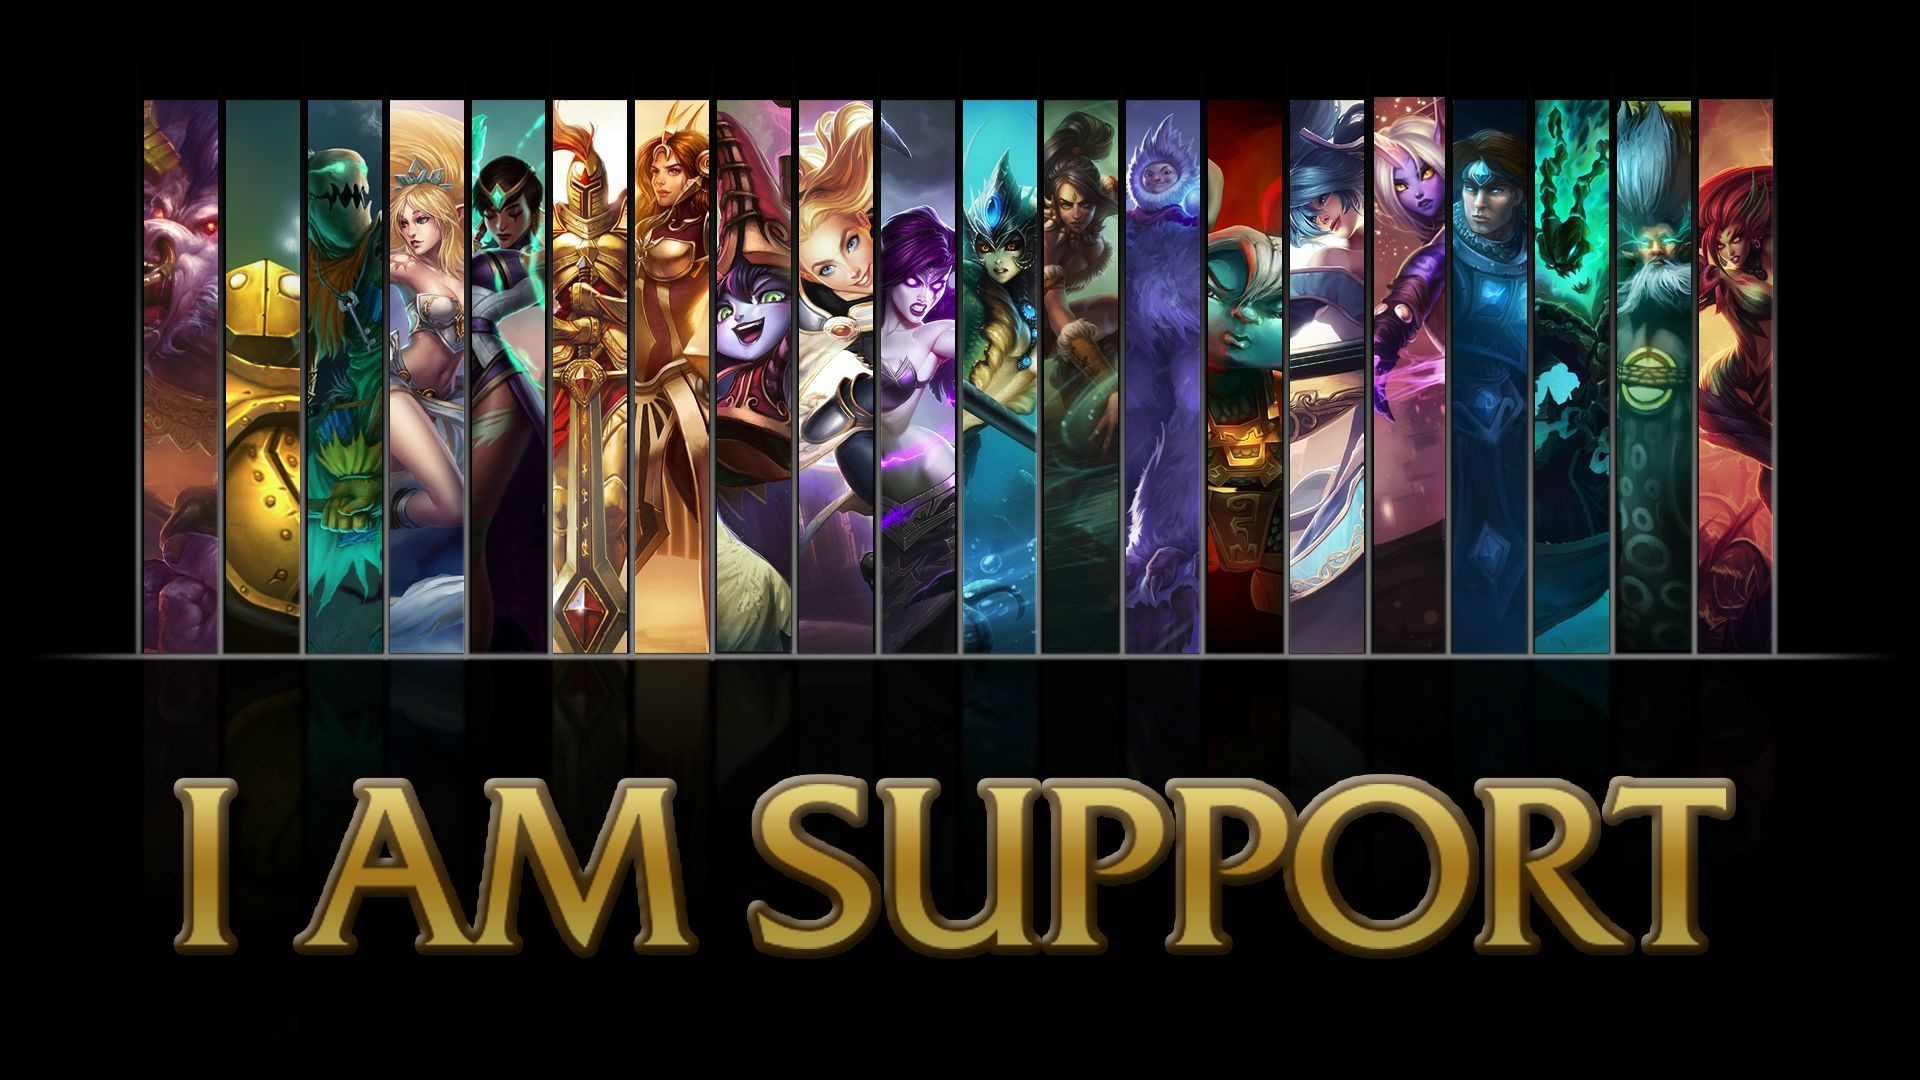 1920x1080 League of Legends "I AM SUPPORT" wallpaper I created